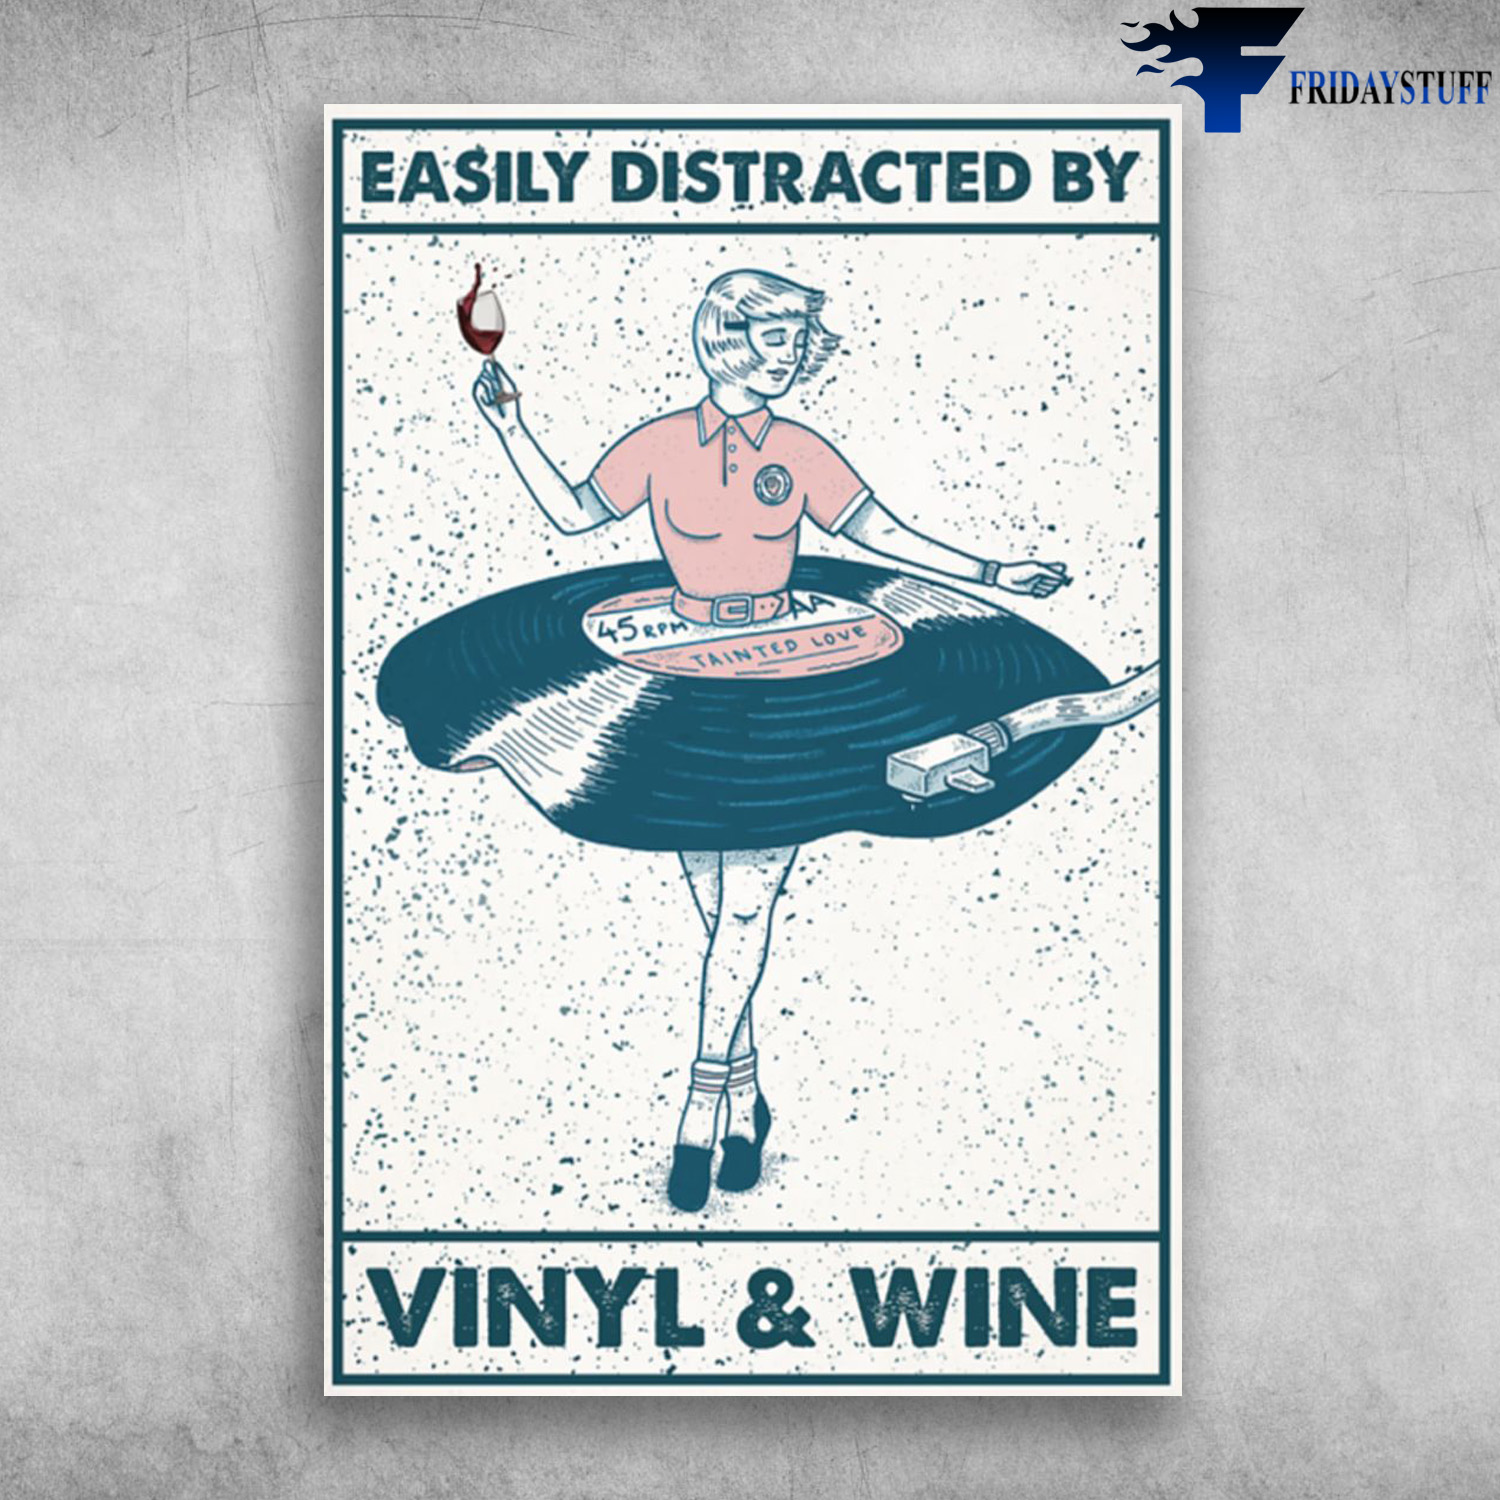 Vinyl Girl And Wine - Easily Distracted By Vinyl And Wine